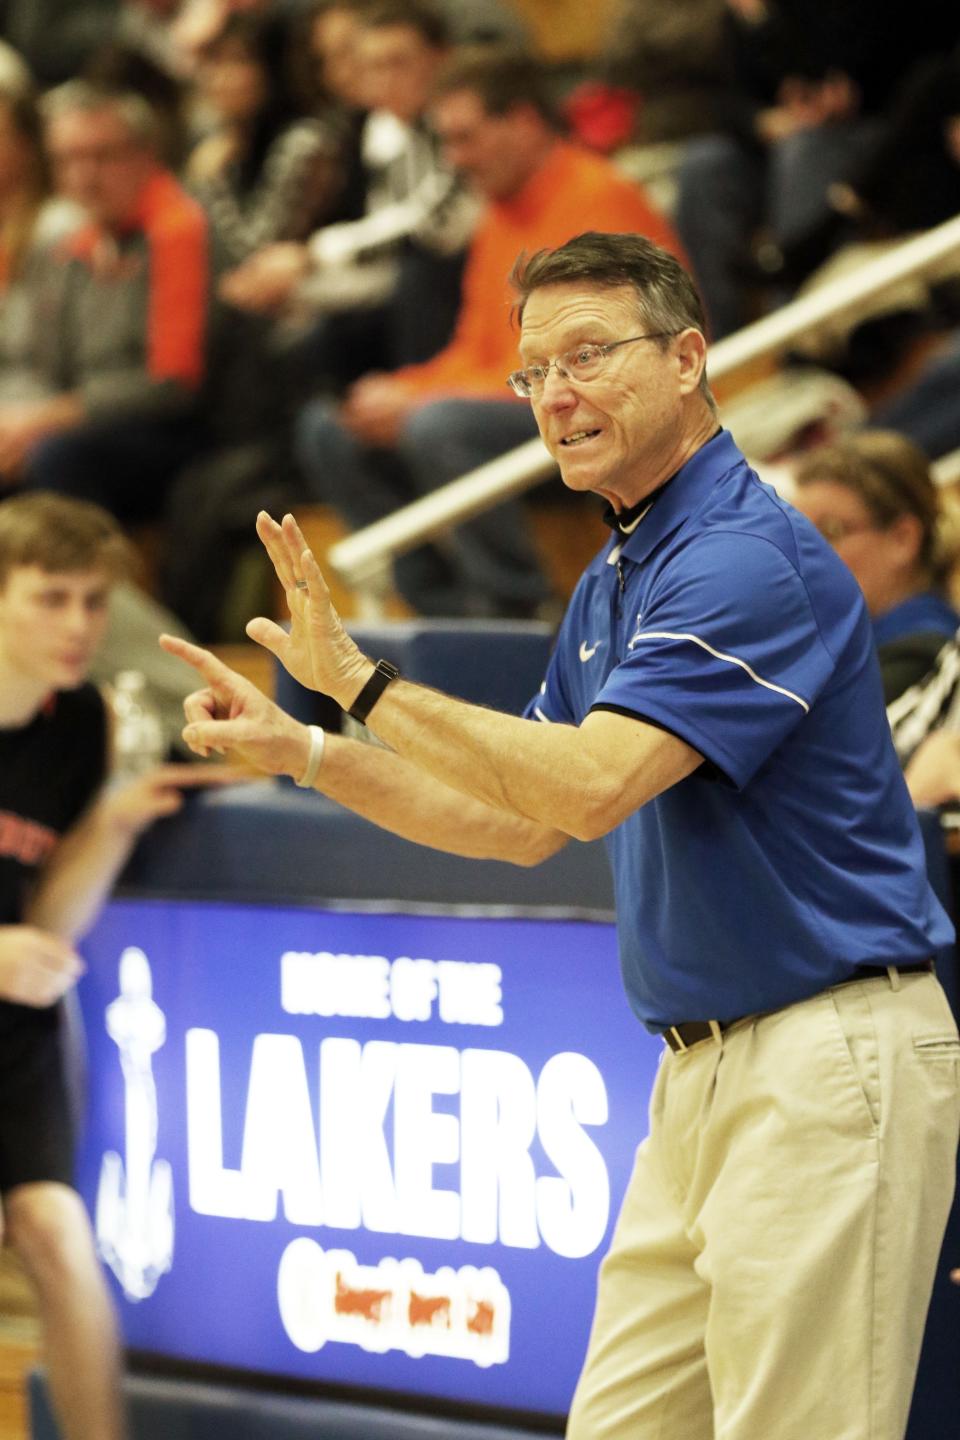 Keith Diebler has coached at seven high schools and has more than 300 wins.